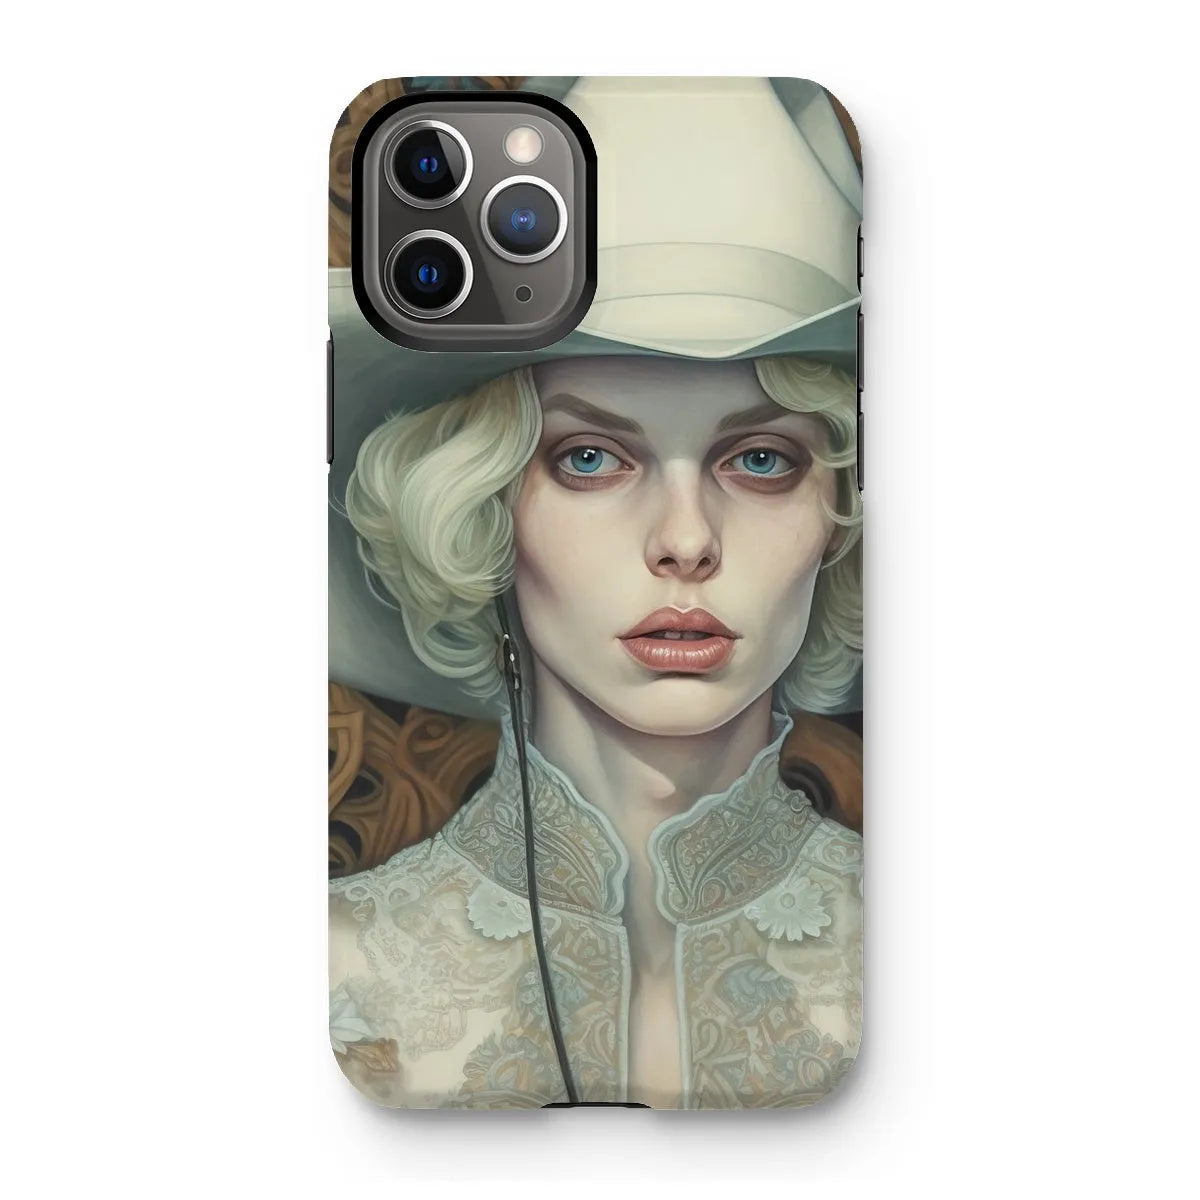 Winnie The Lesbian Cowgirl - Sapphic Art Phone Case - Iphone 11 Pro / Matte - Mobile Phone Cases - Aesthetic Art